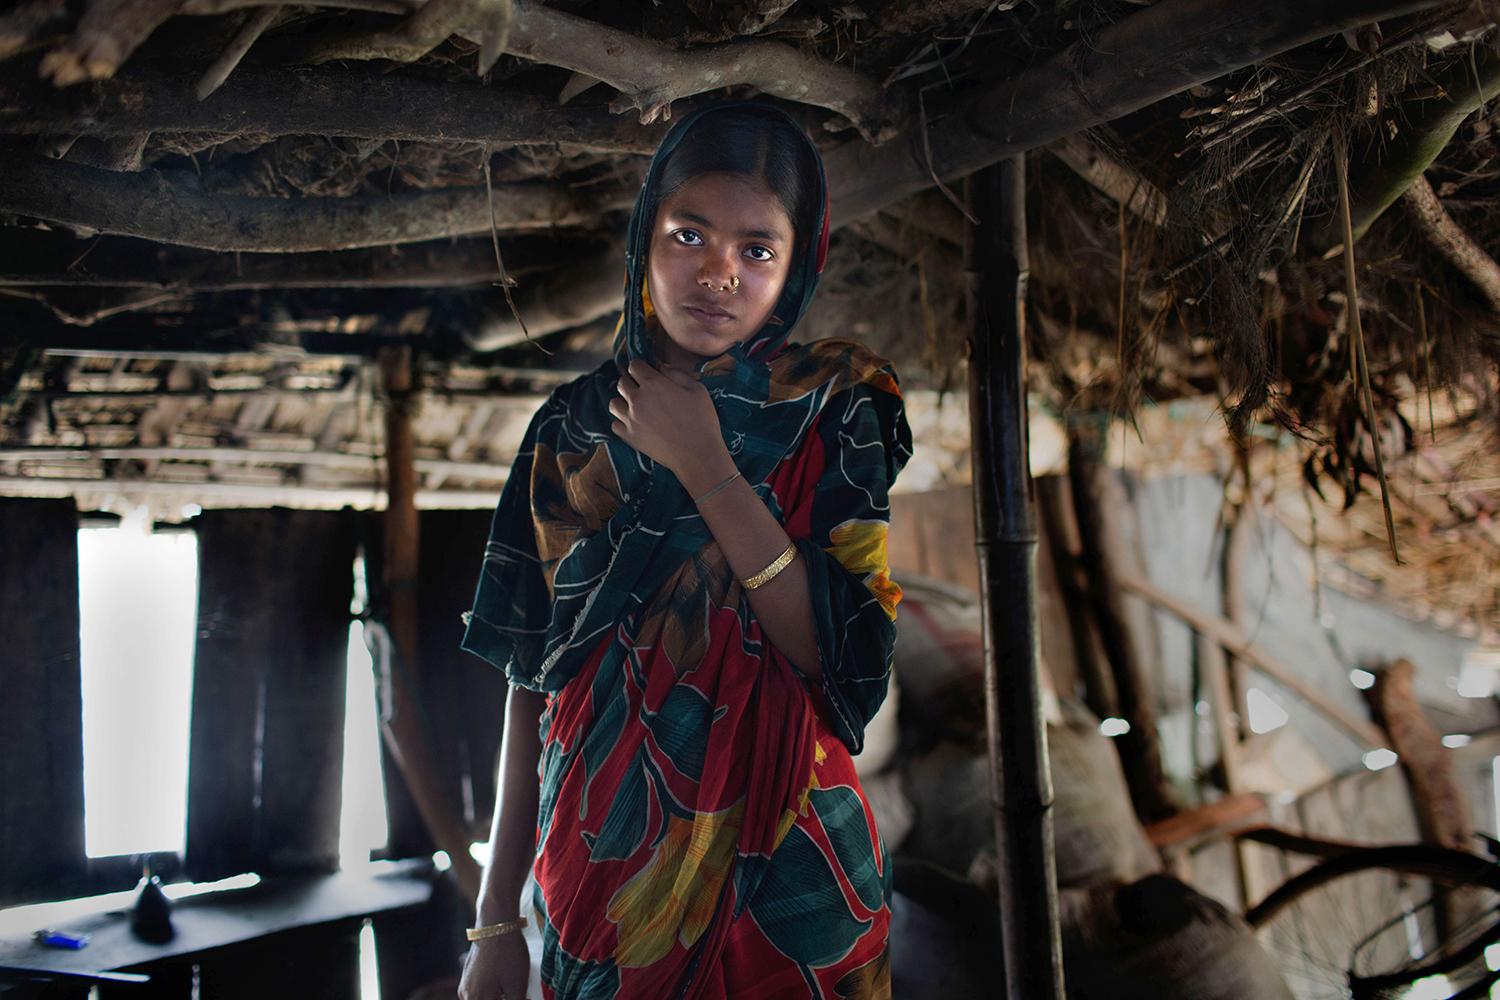 Thirteen-year-old Sifola in the home she shares with her husband and in-laws in Bangladesh. Sifola’s parents, struggling with poverty, took her out of school and arranged for her marriage so that the money saved could pay for her brothers’ schooling. © 20